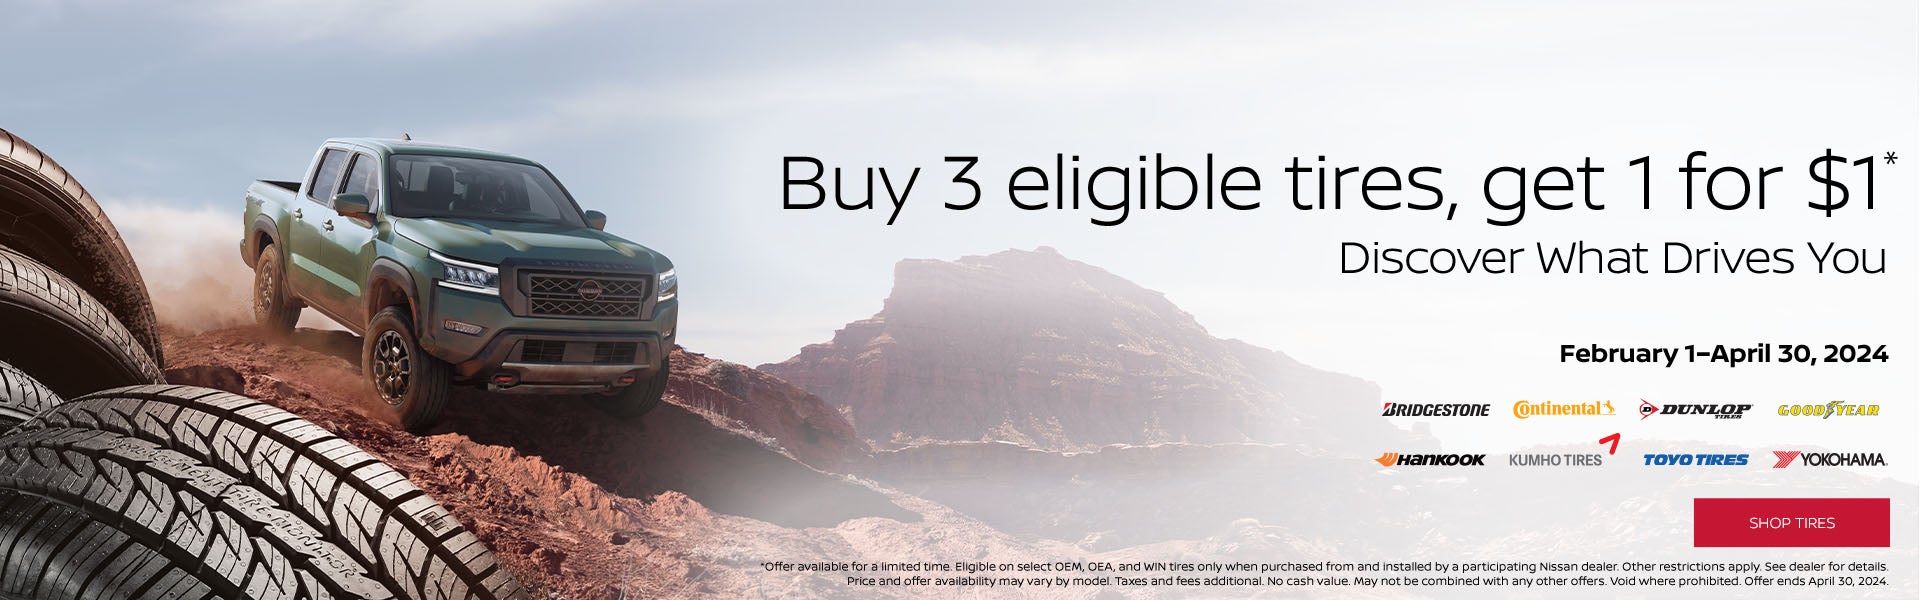 Buy e eligible tires, get 1 for $1*